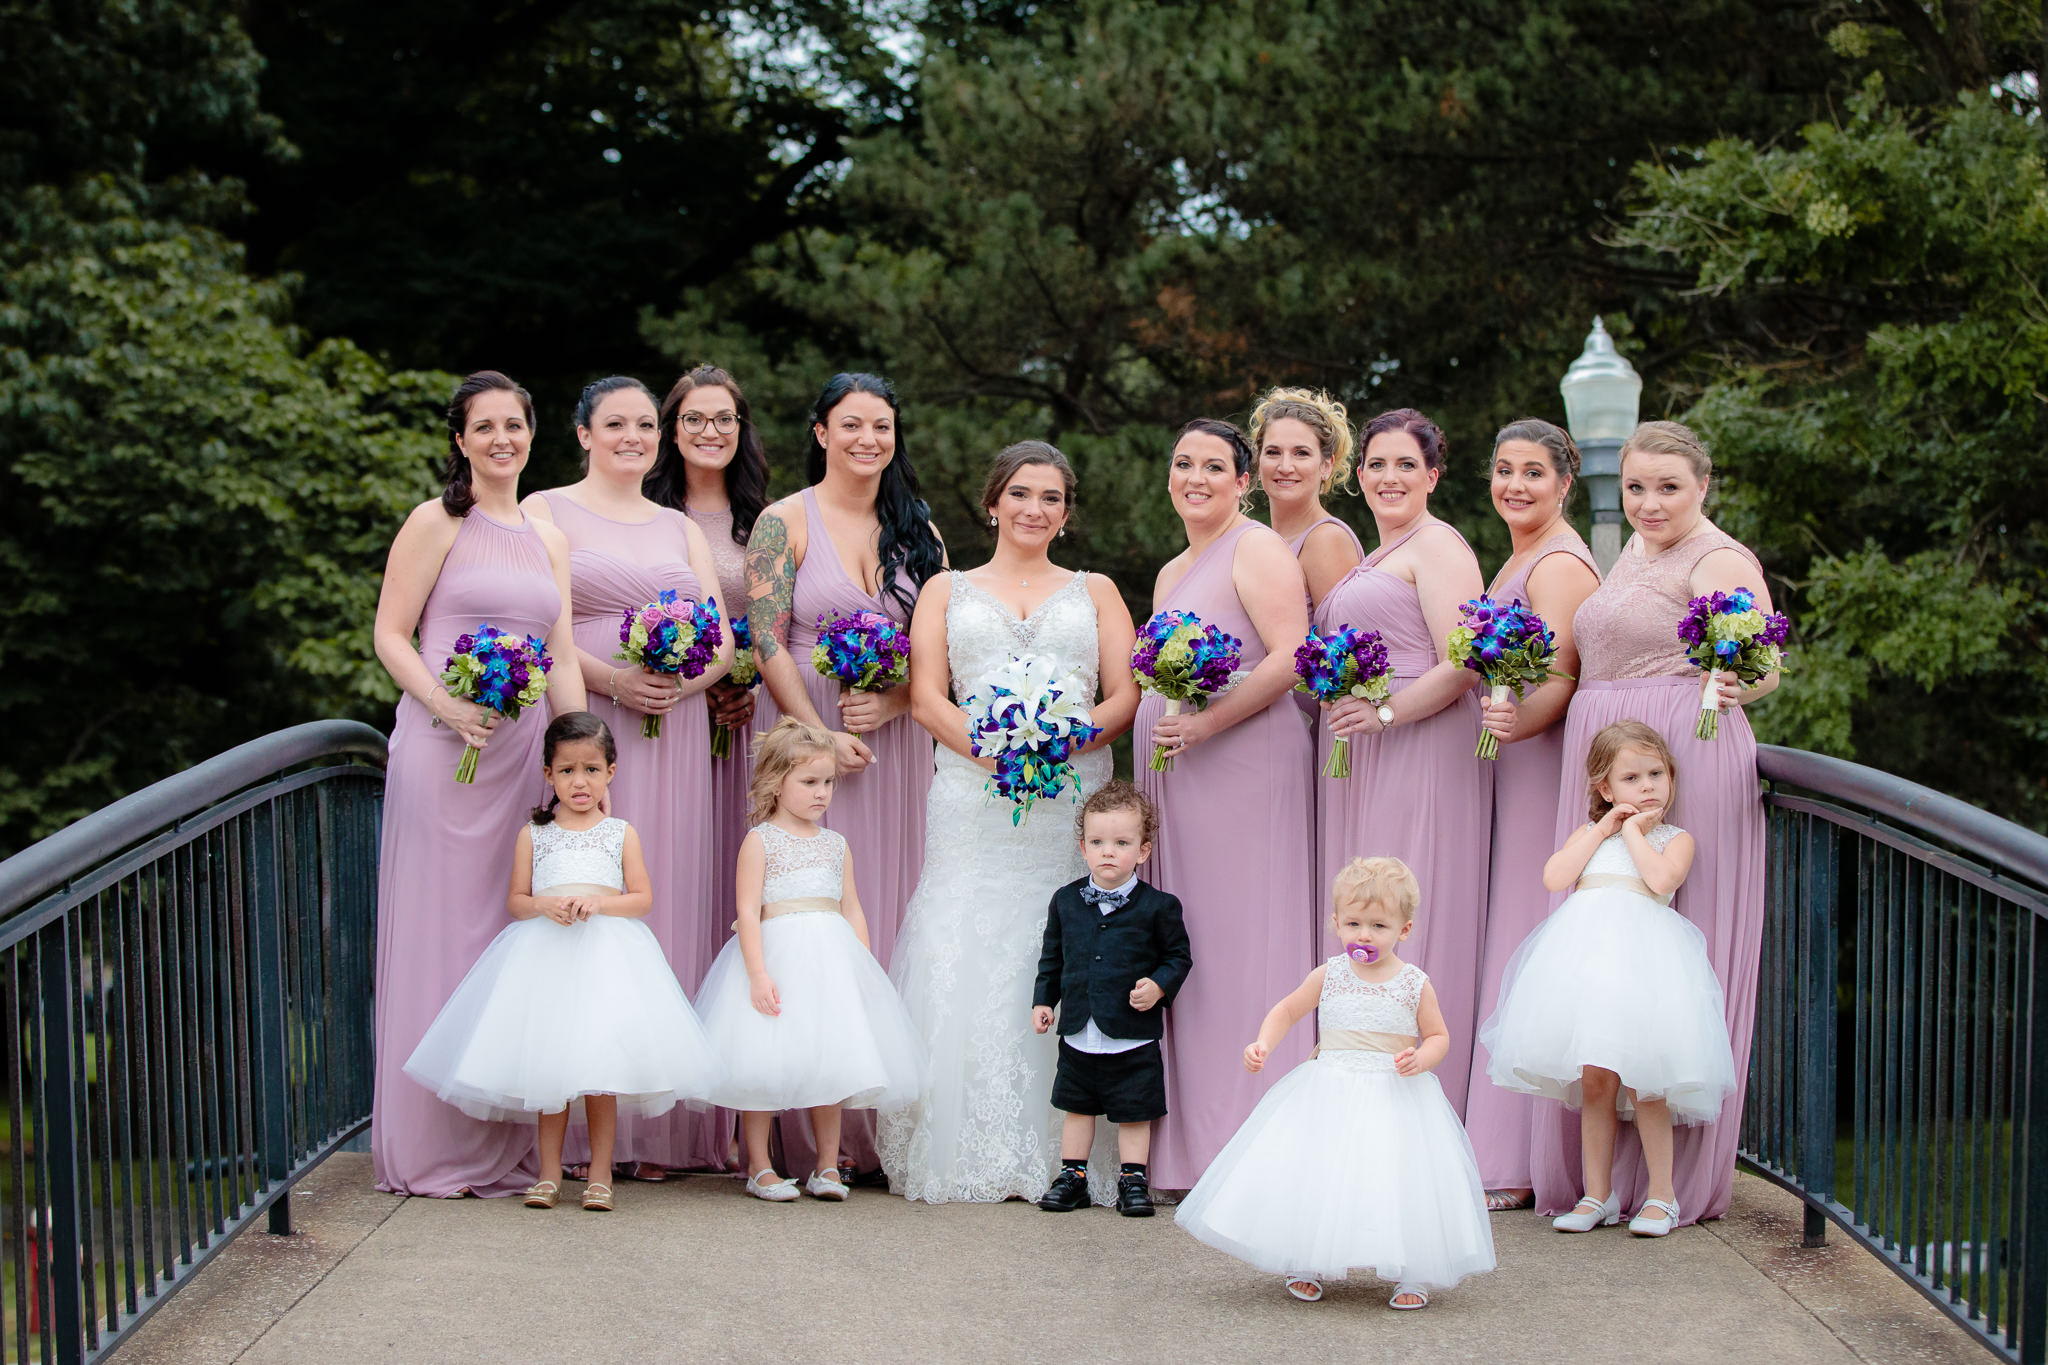 Bridesmaids, flower girls, & ring bearer pose with the bride on a bridge in Allegheny Commons Park